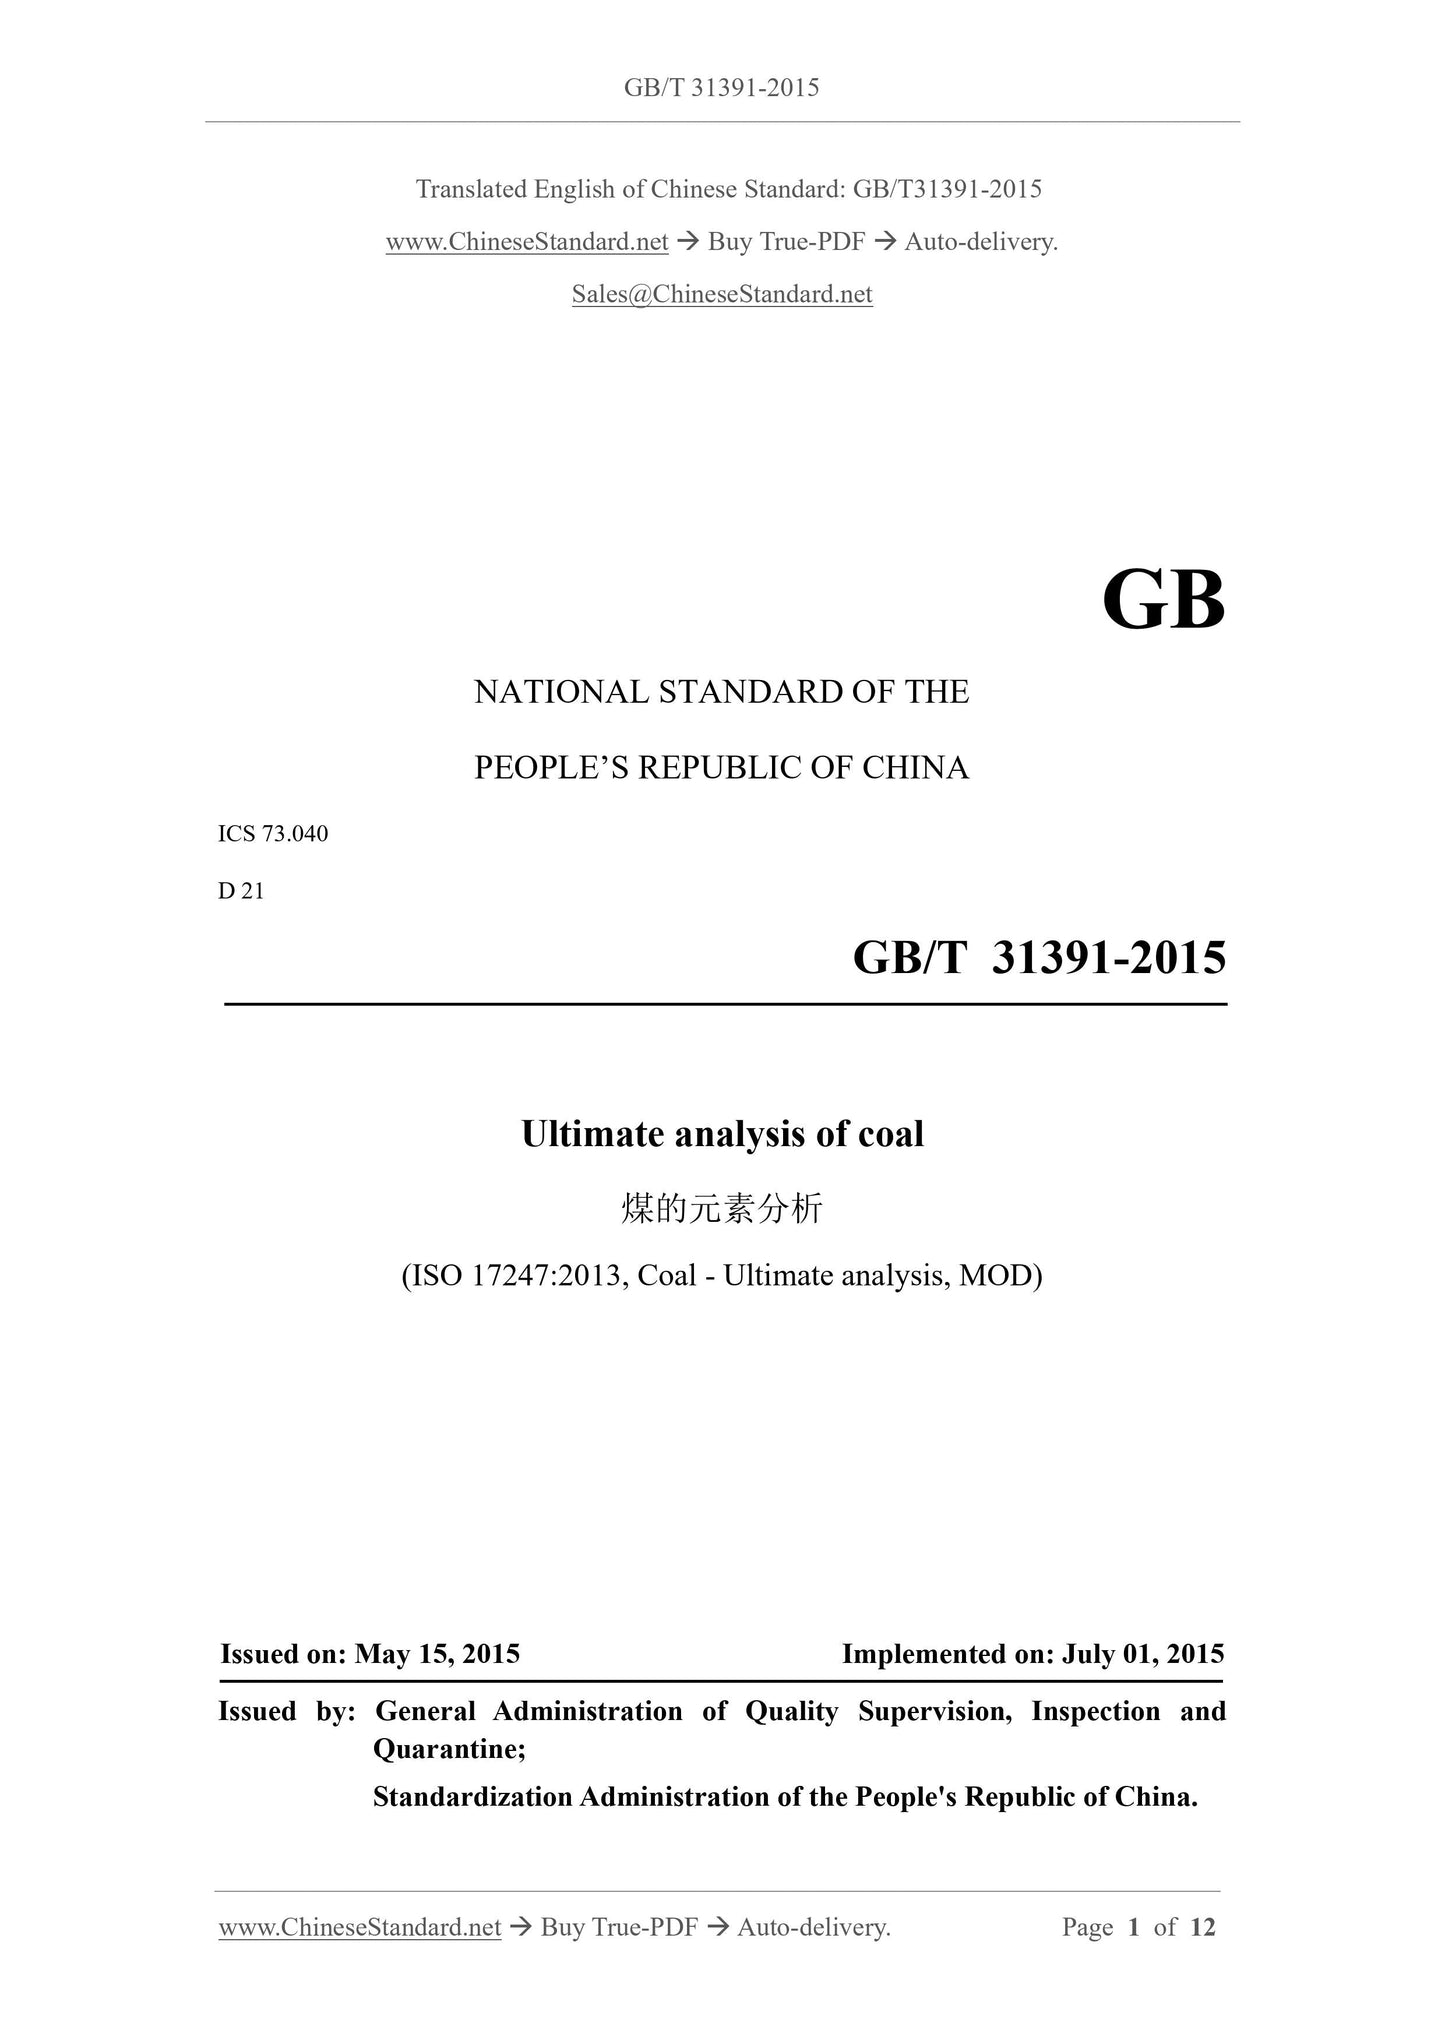 GB/T 31391-2015 Page 1